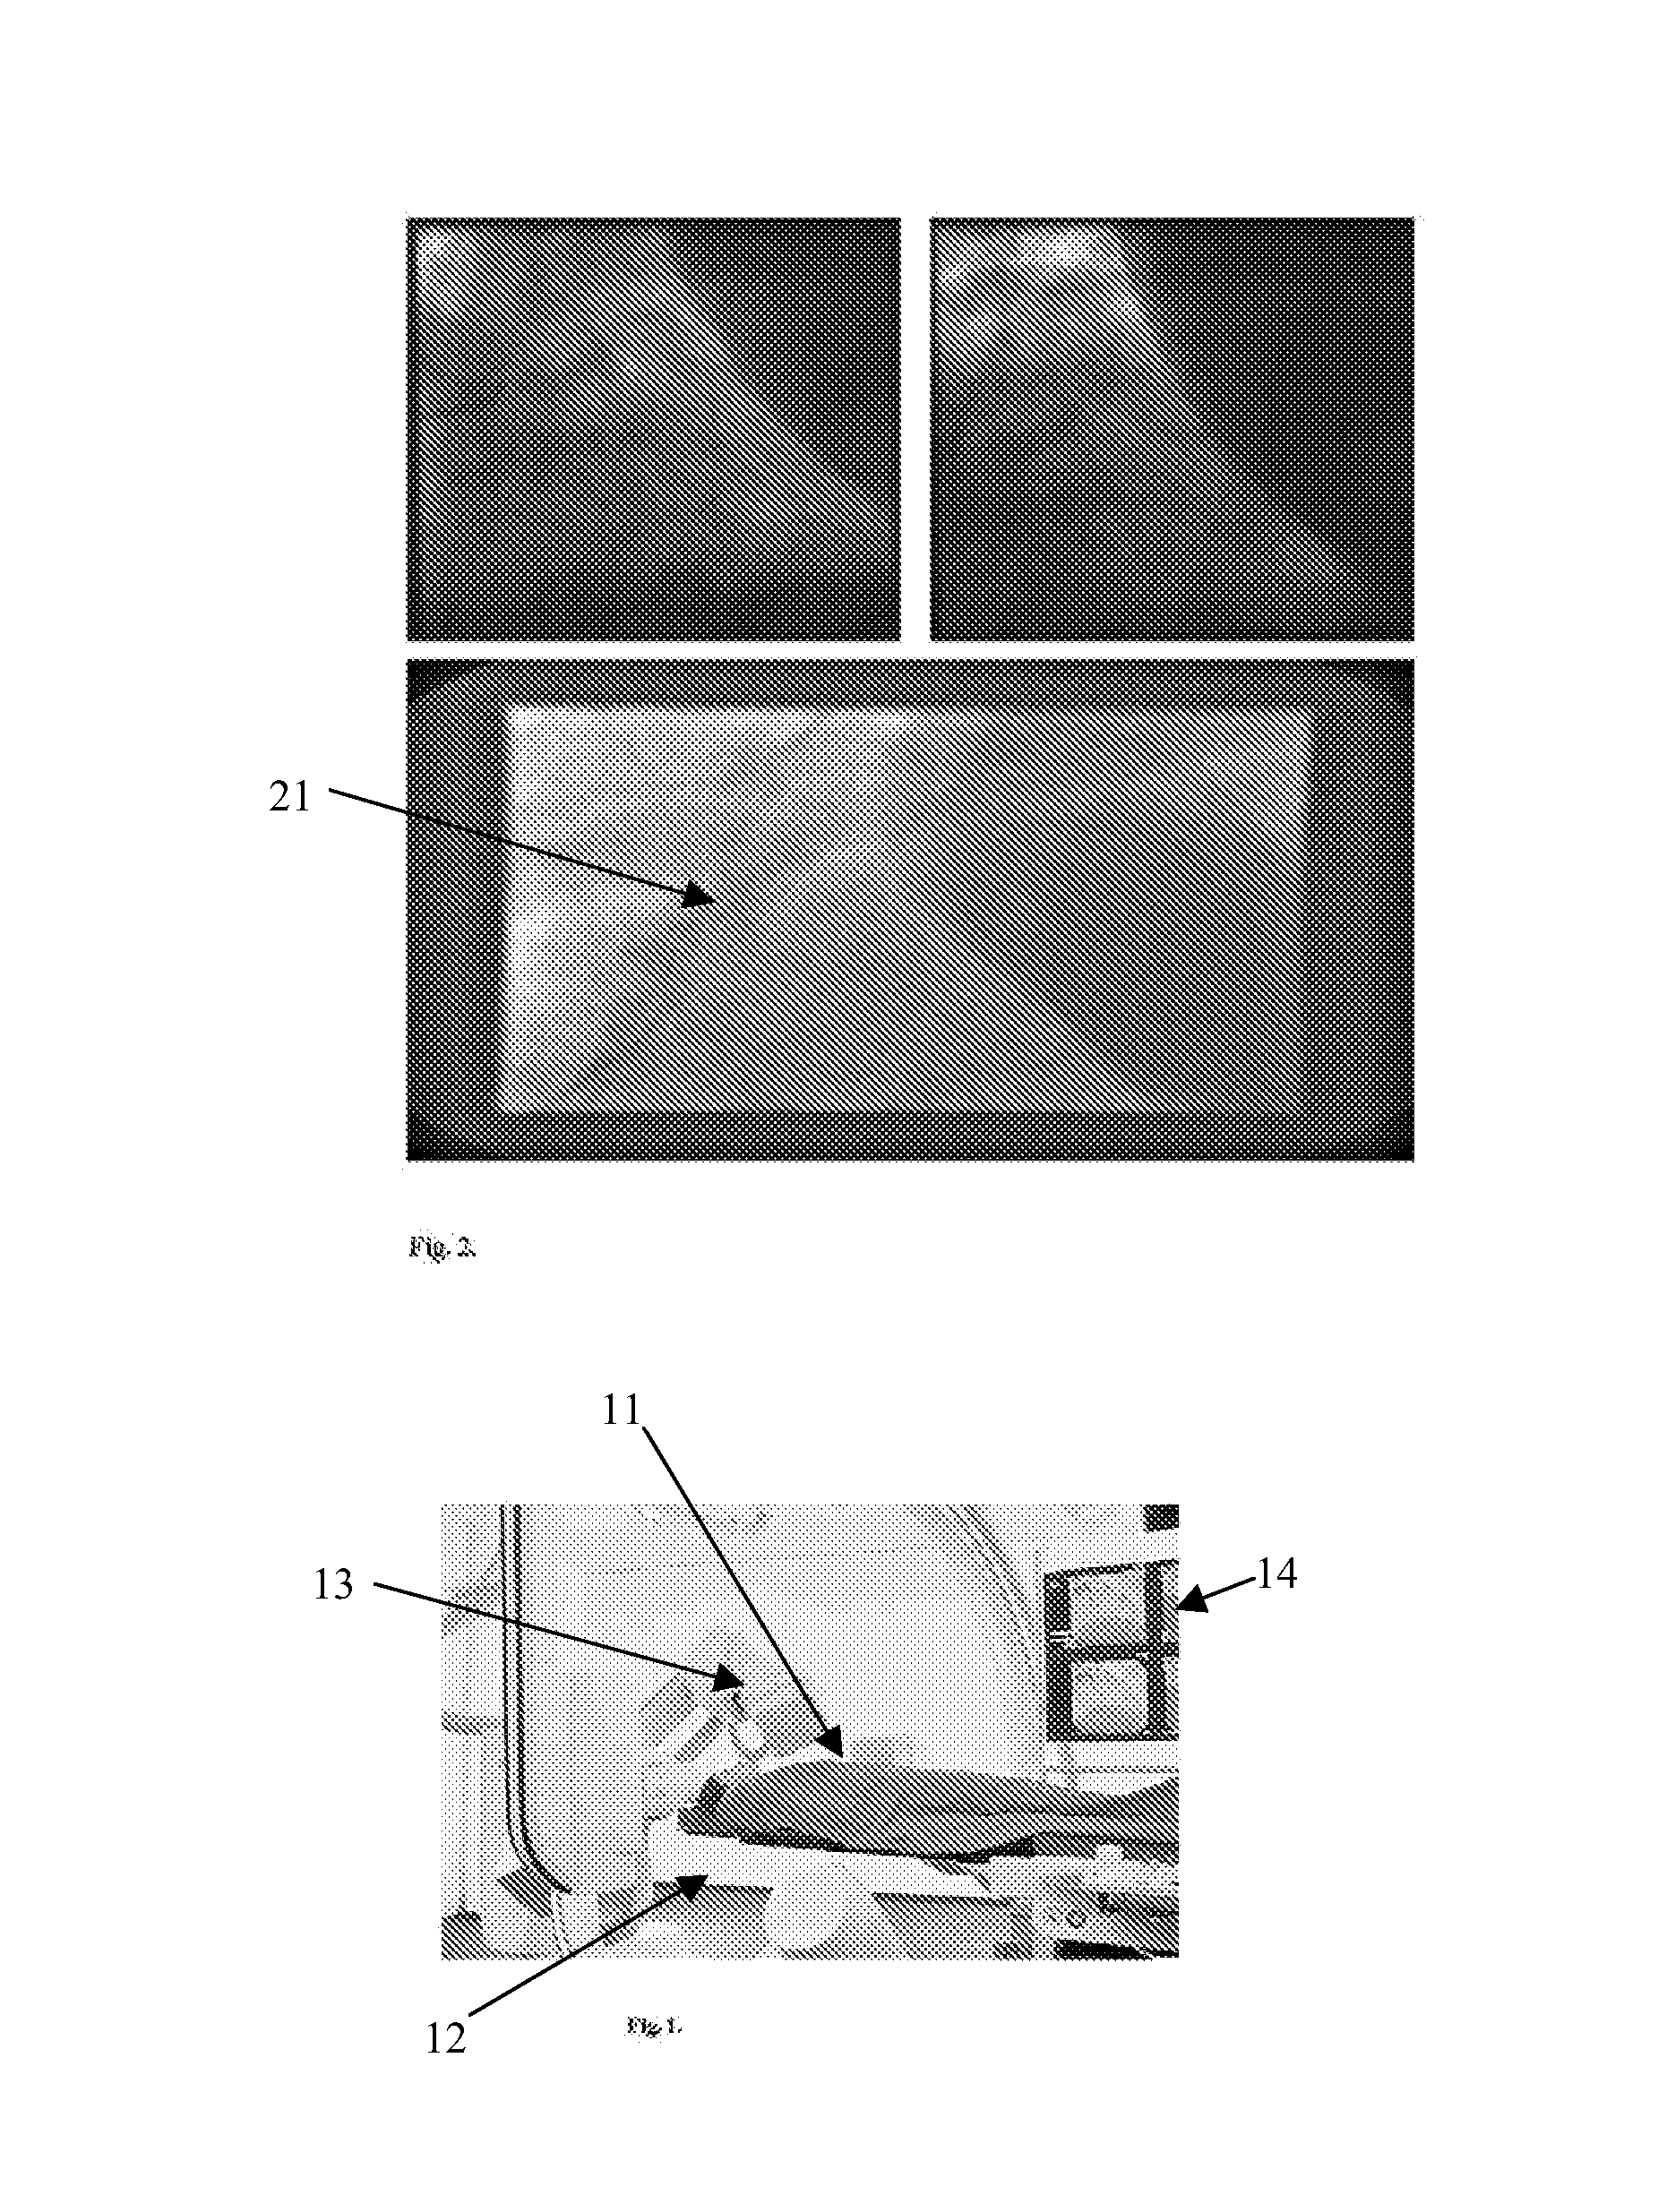 System and Method For Simultaneously Subsampling Fluoroscopic Images and Enhancing Guidewire Visibility